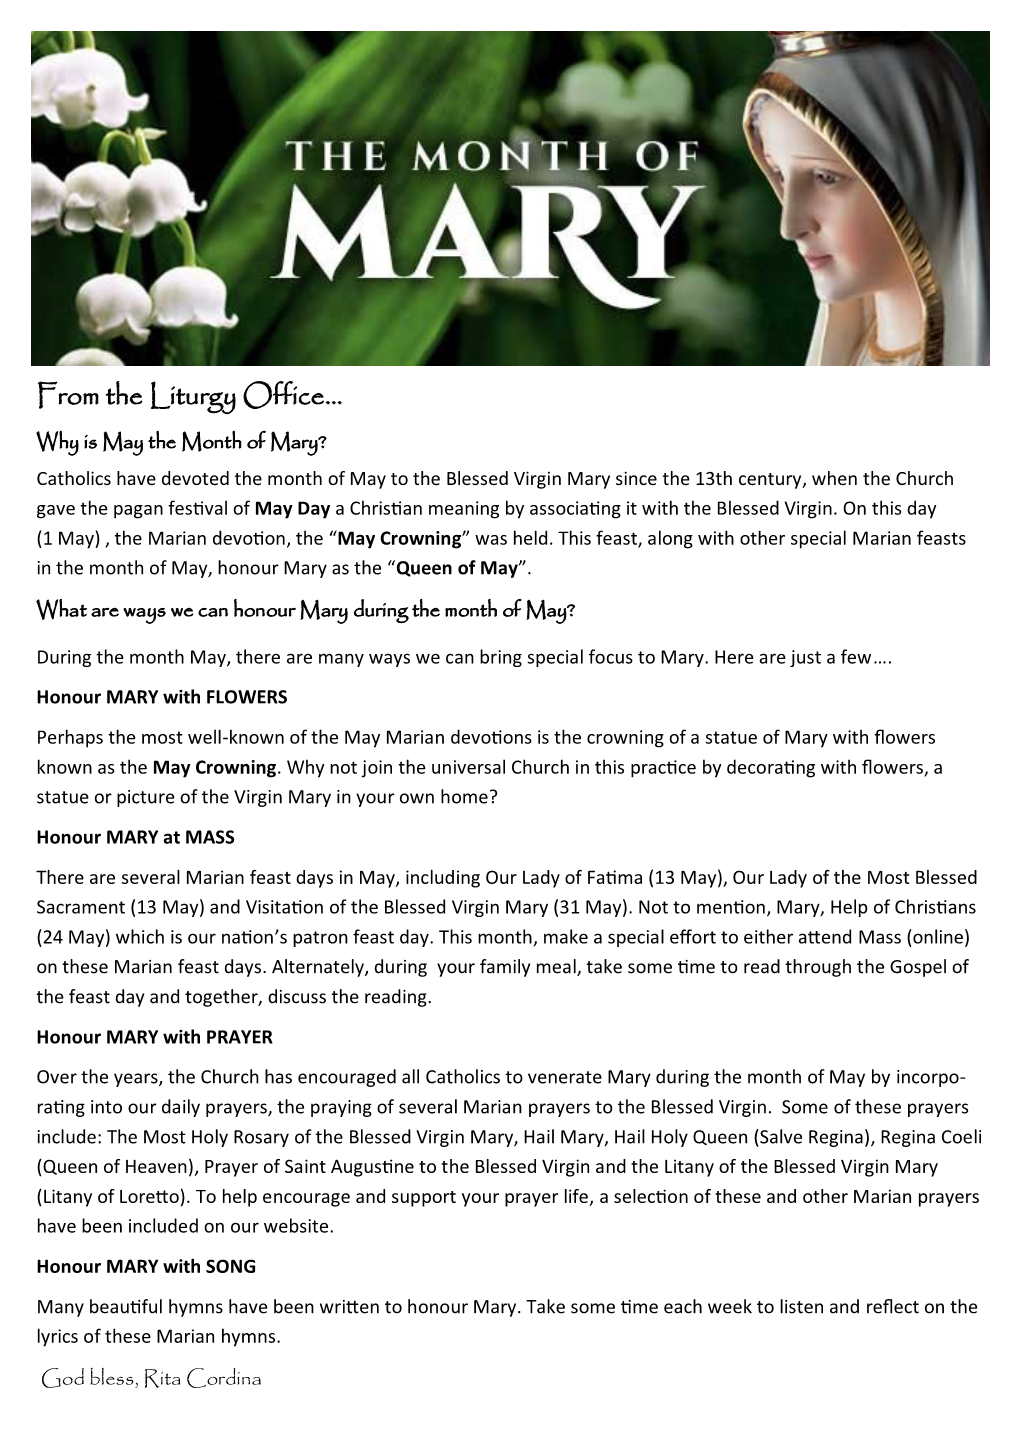 May the Month Dedicated to Mary